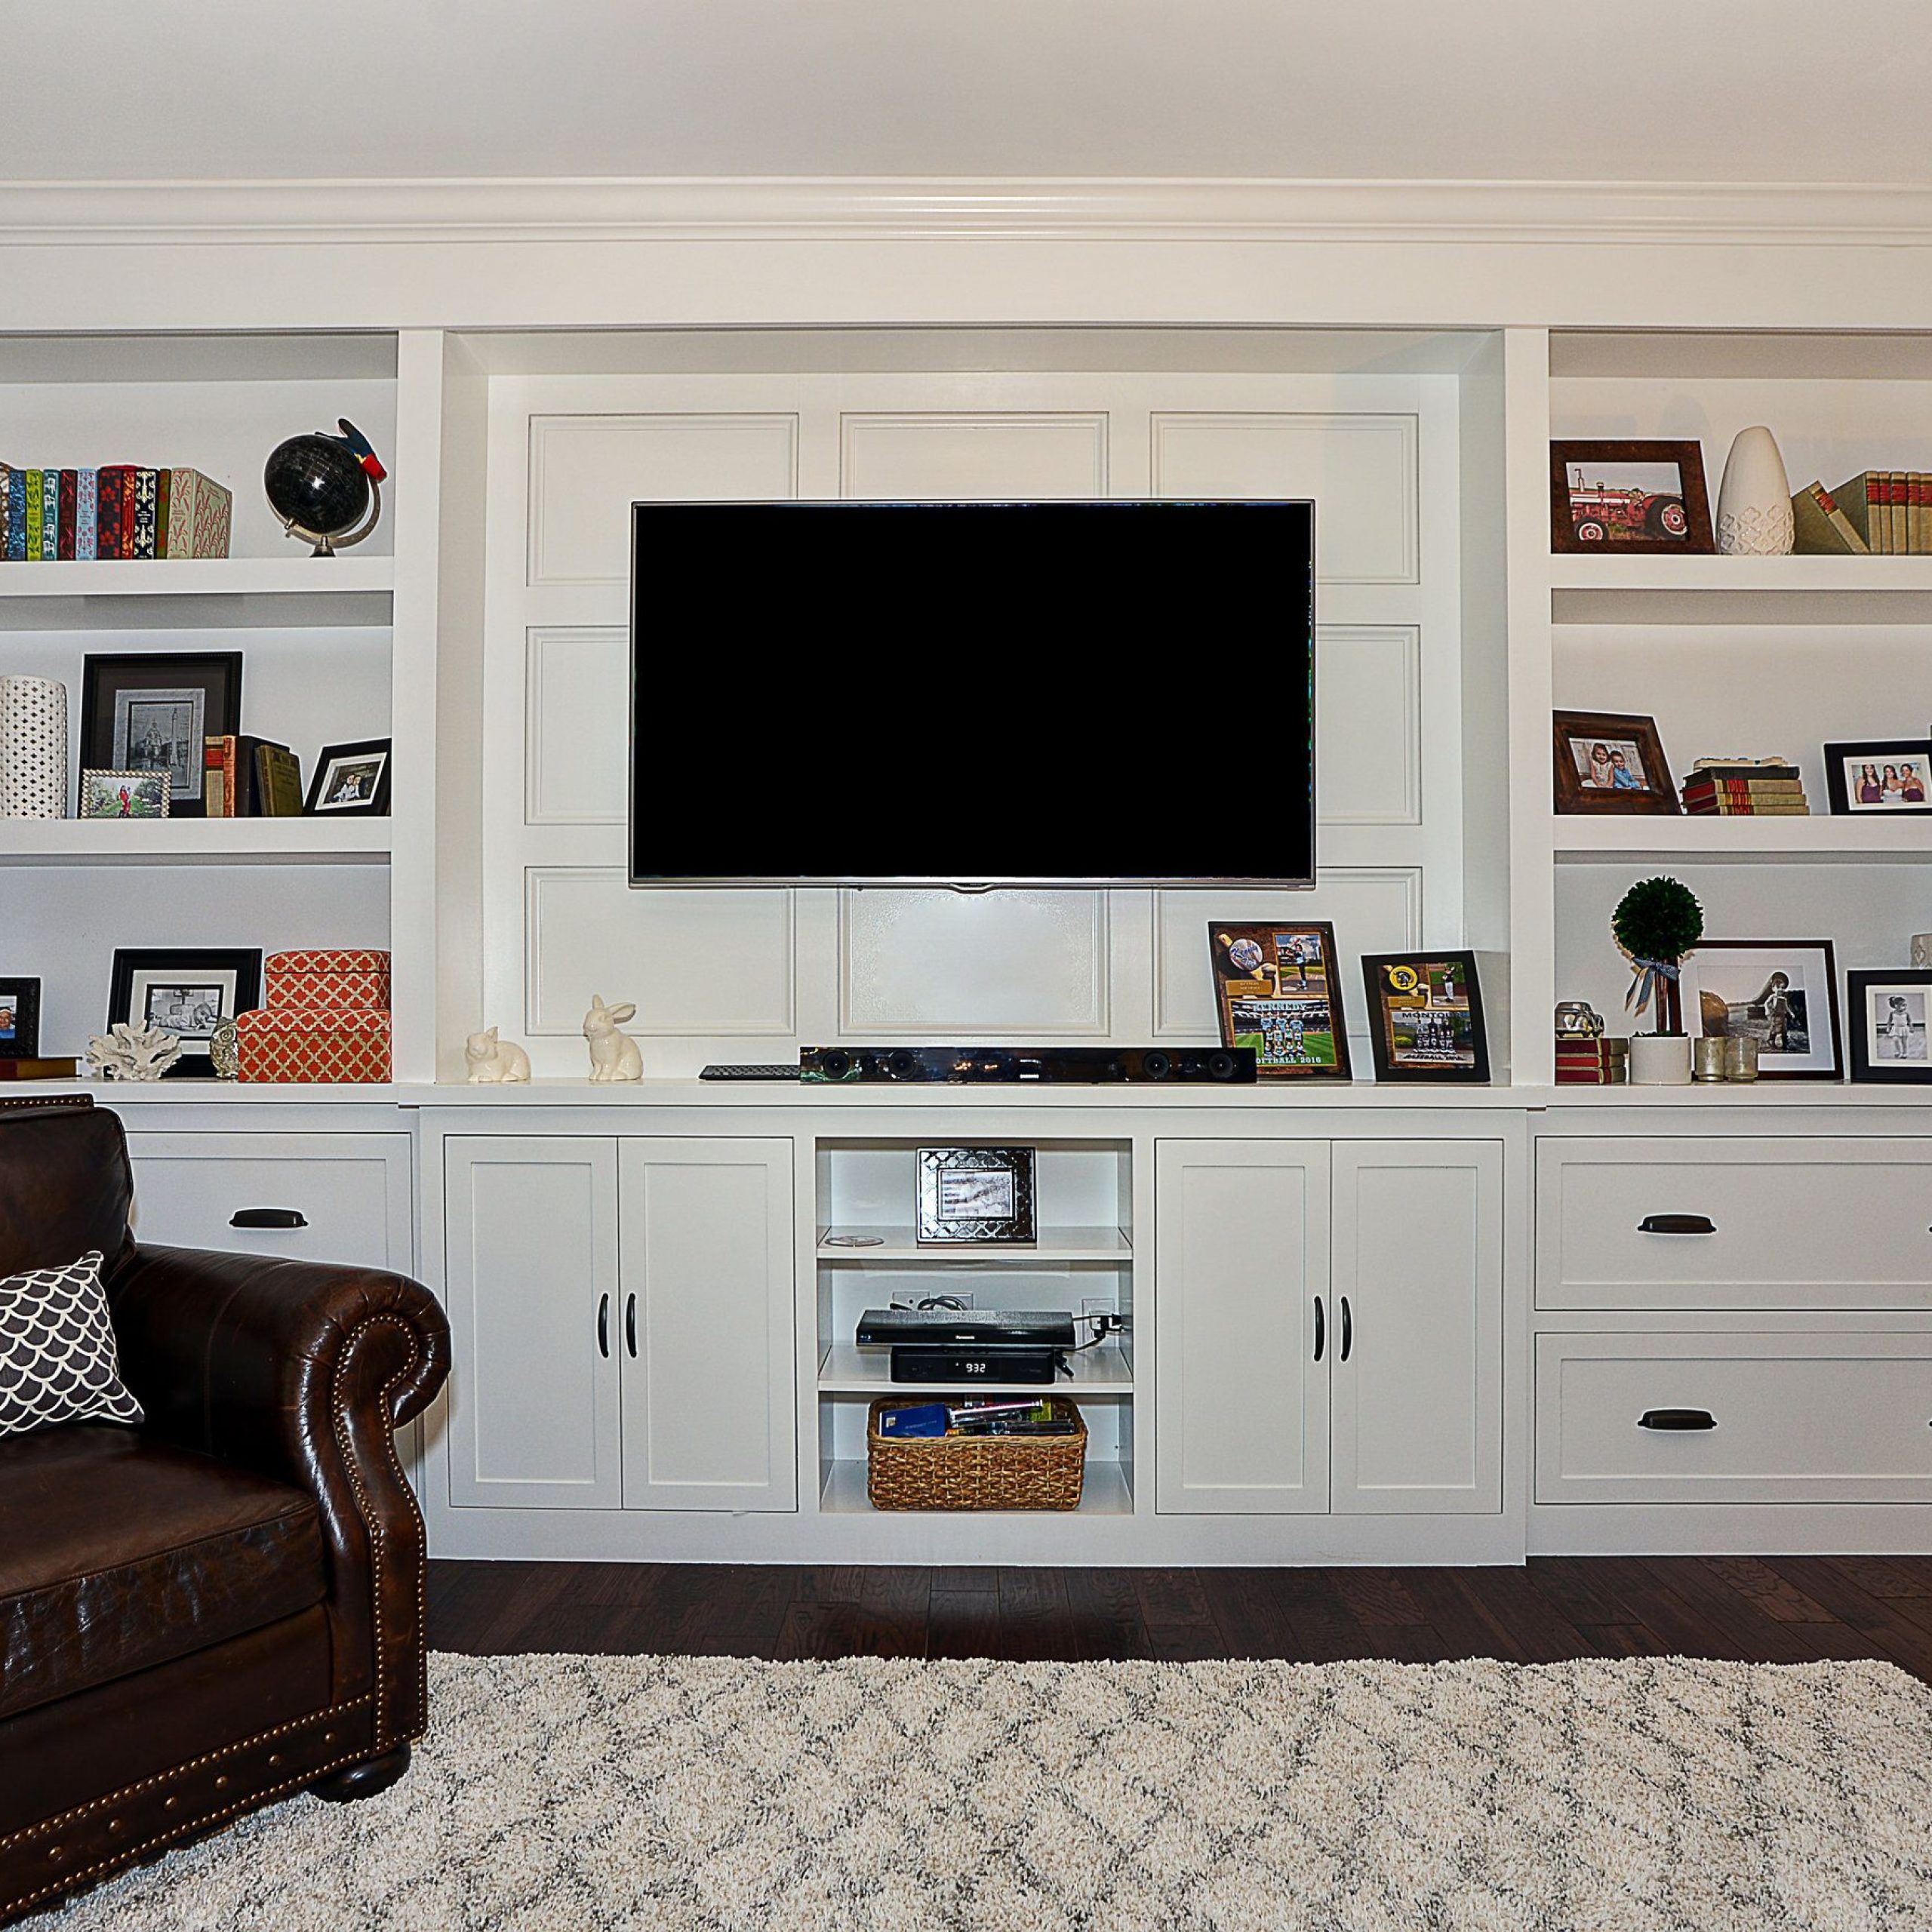 Organizing Your Living Room With An Entertainment Center With Storage Intended For Entertainment Center With Storage Cabinet (Gallery 5 of 20)